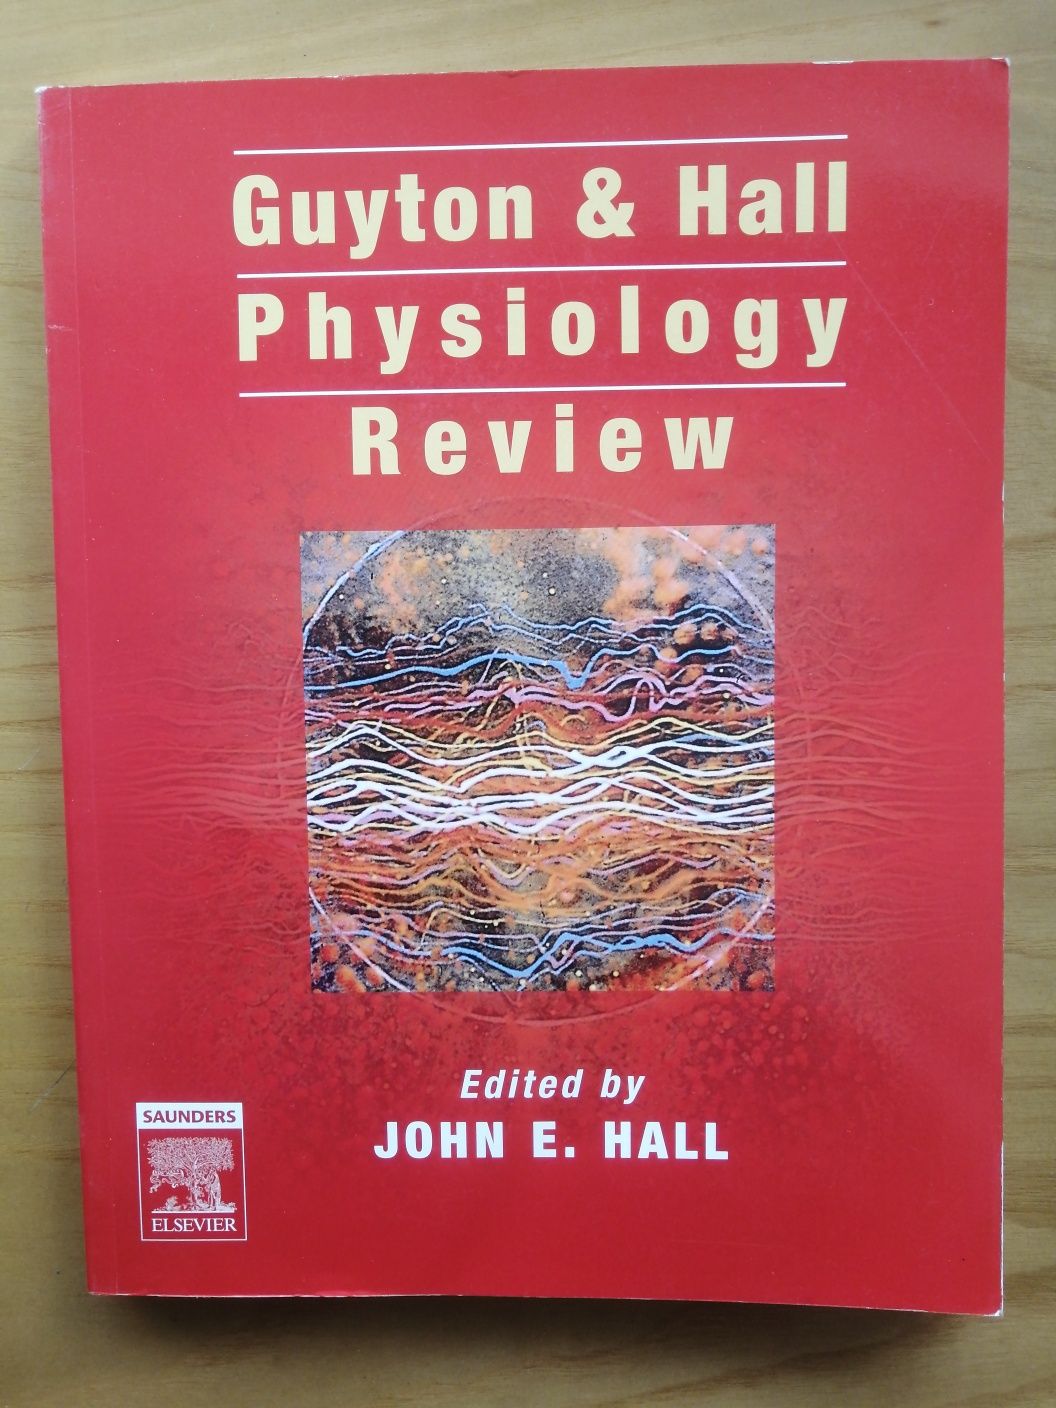 Guyton & Hall Physiology Review. Medicina e Fisiologia